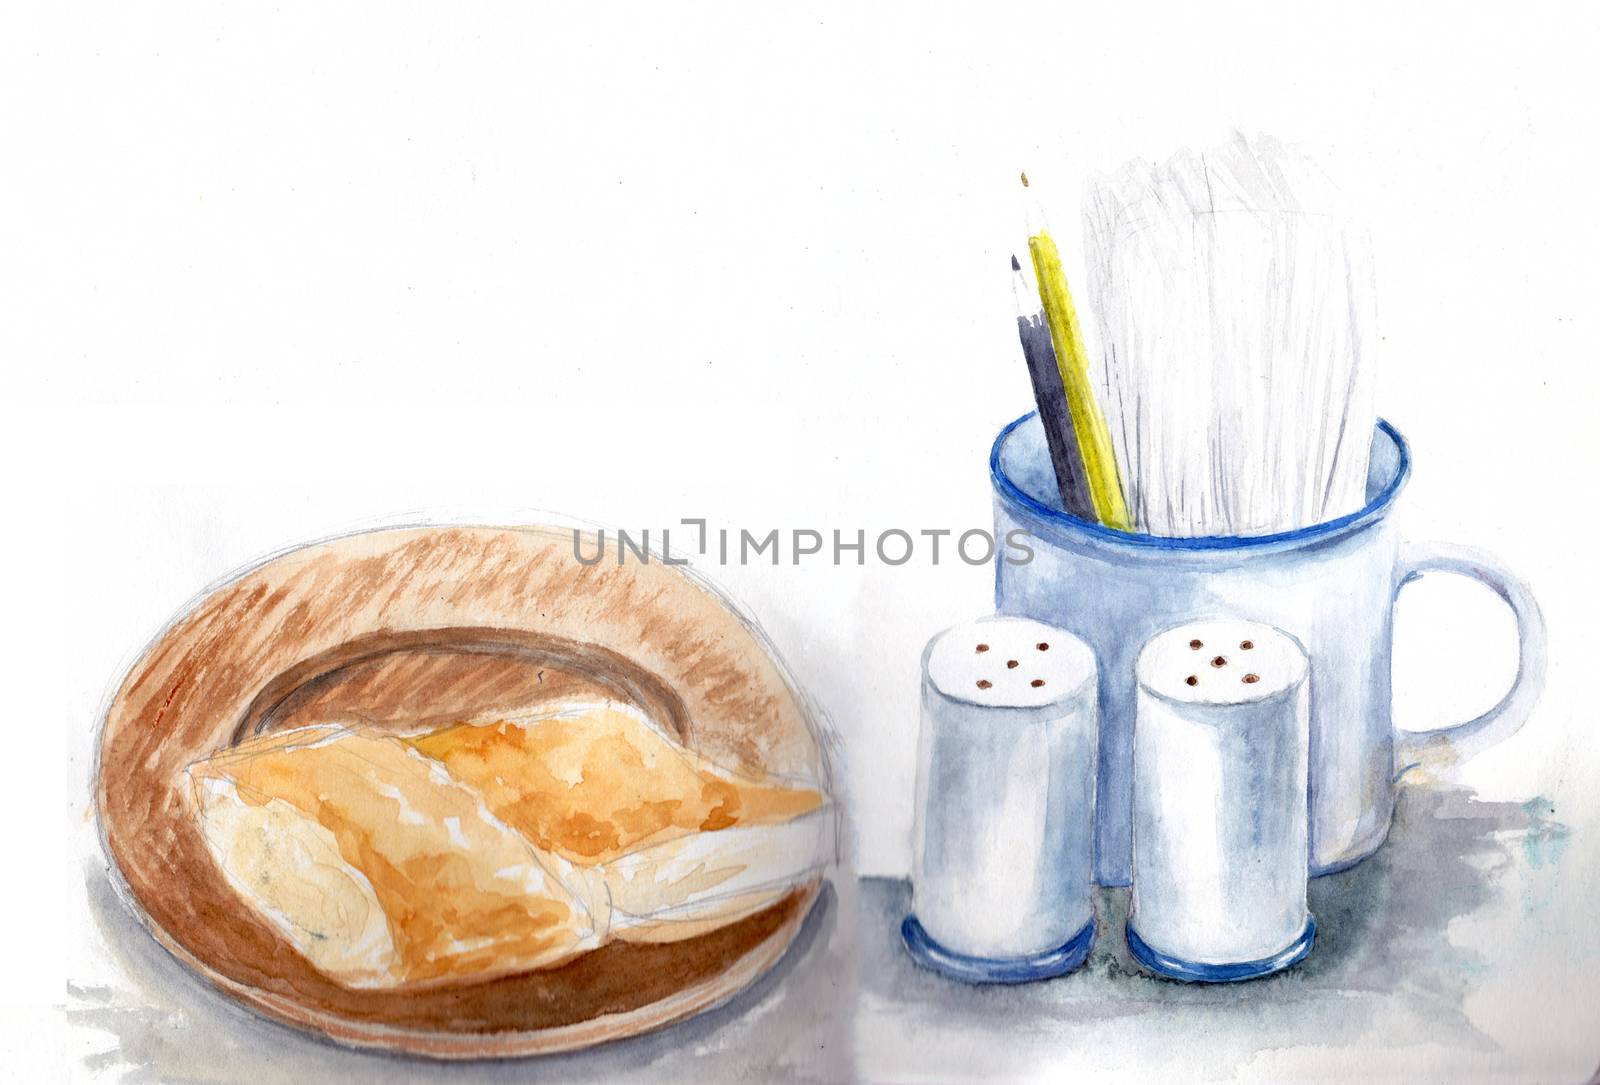 Hand Drawn Sketch from Cafe. Objects on table: Mug, salt and pepper, pastry bun on plate. Watercolor illustration.